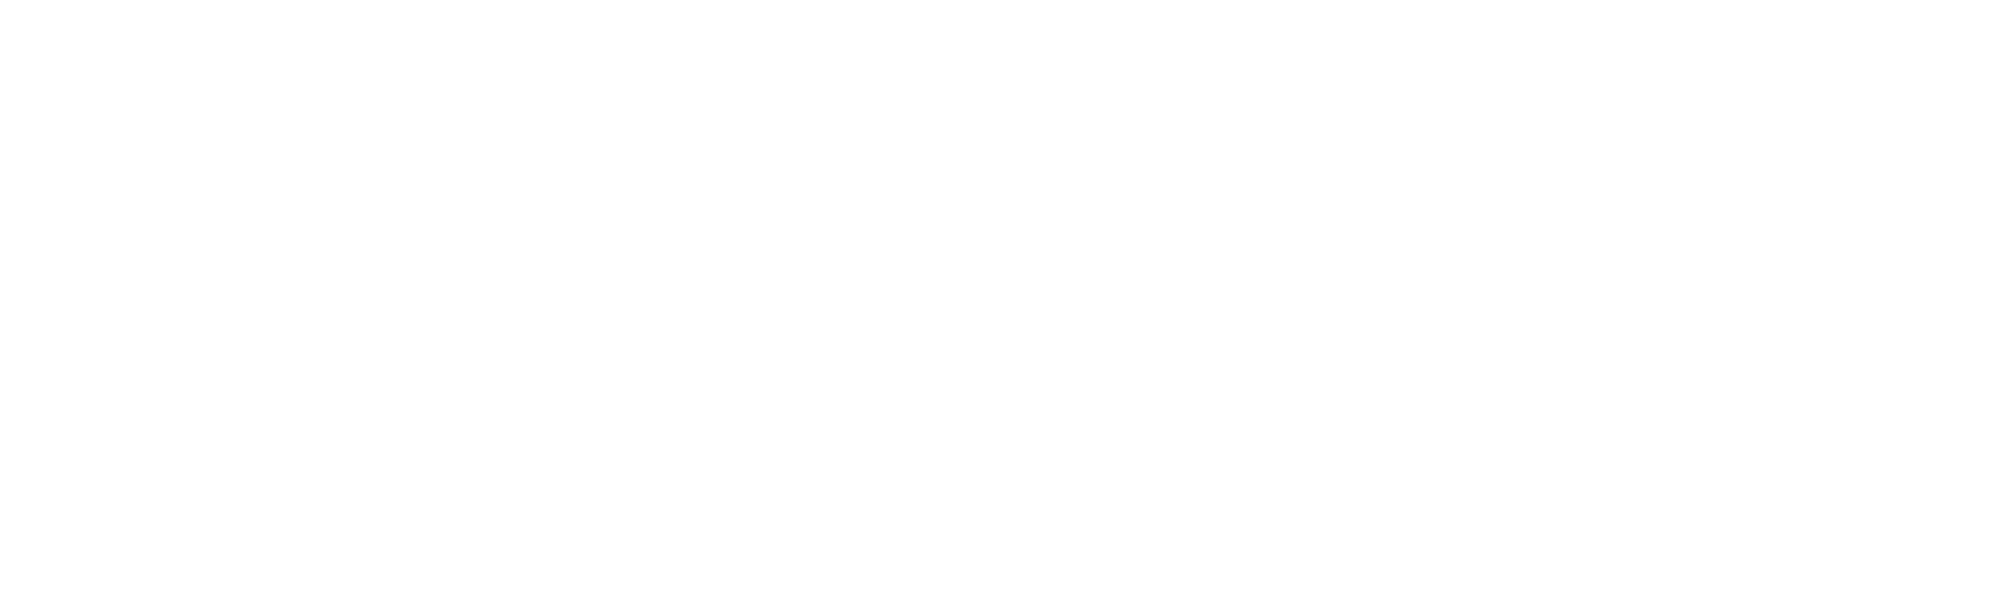 Logo of the Rotisserie-Royale and the Gästehaus am Schlossberg